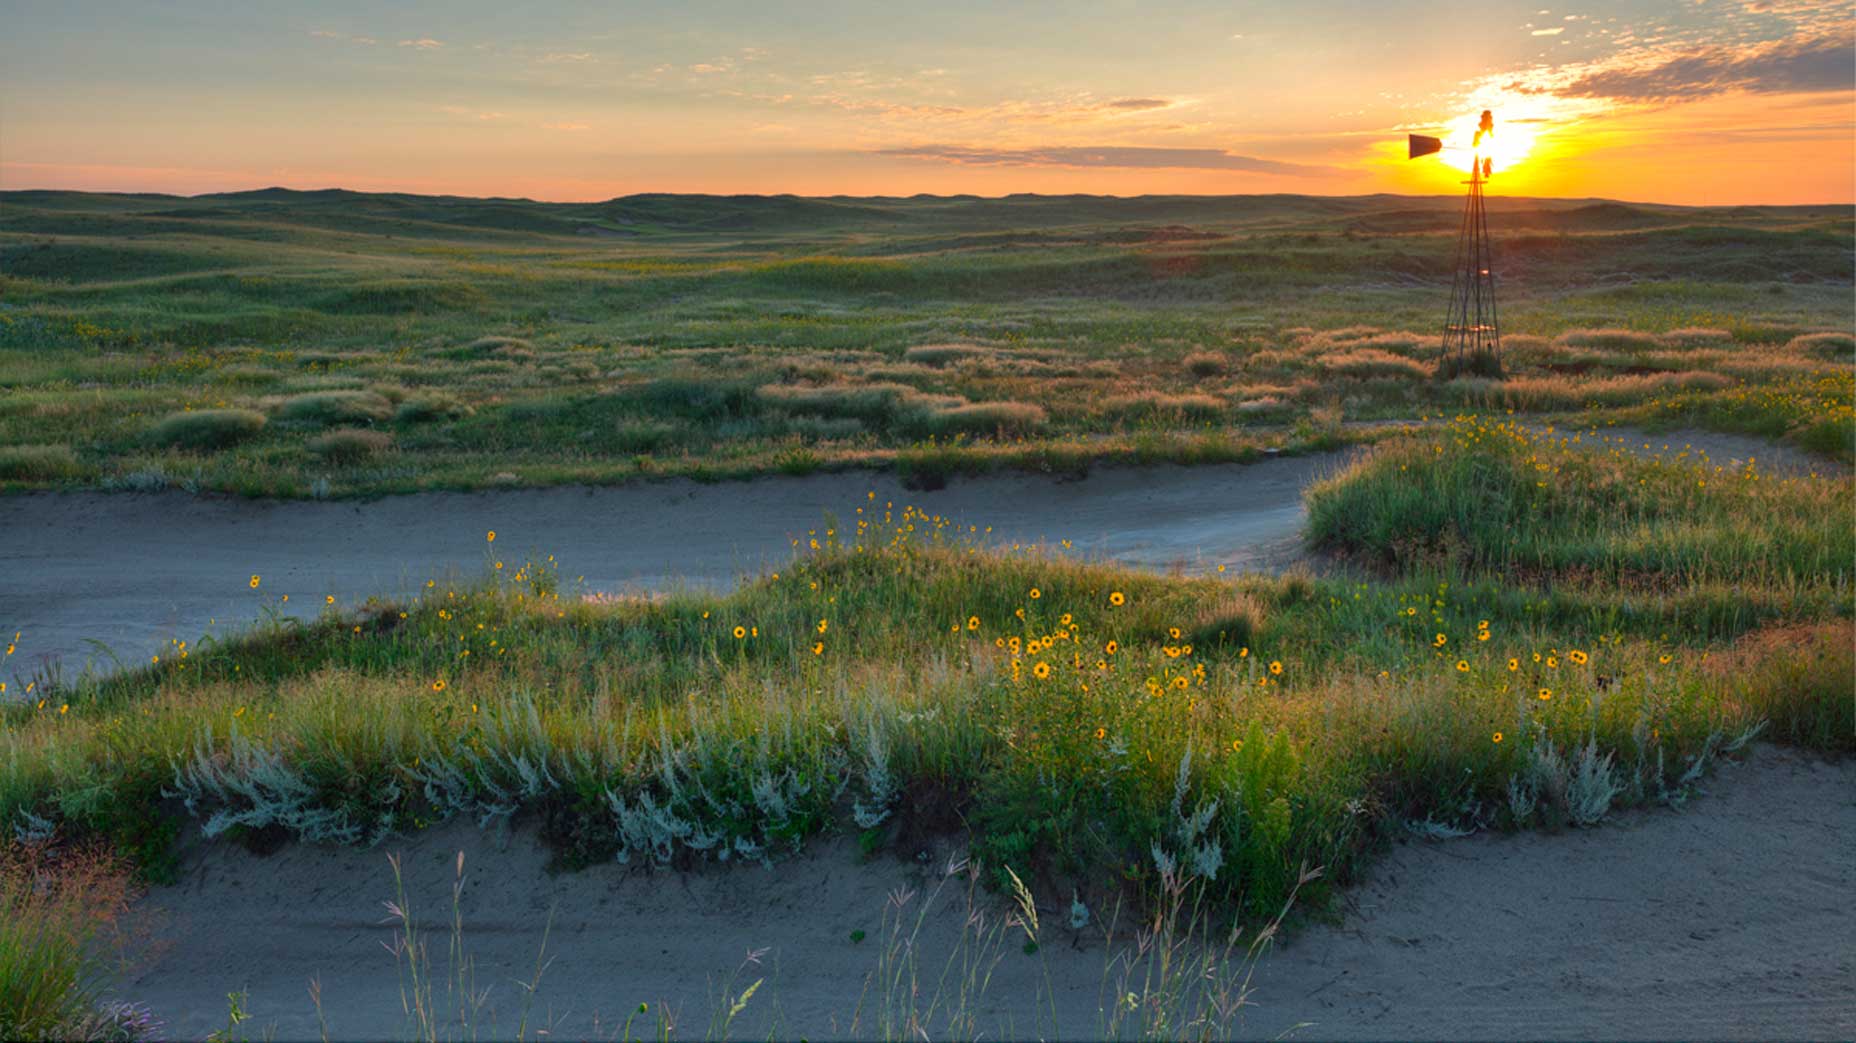 Best golf courses in Nebraska, according to GOLF Magazine’s expert course raters